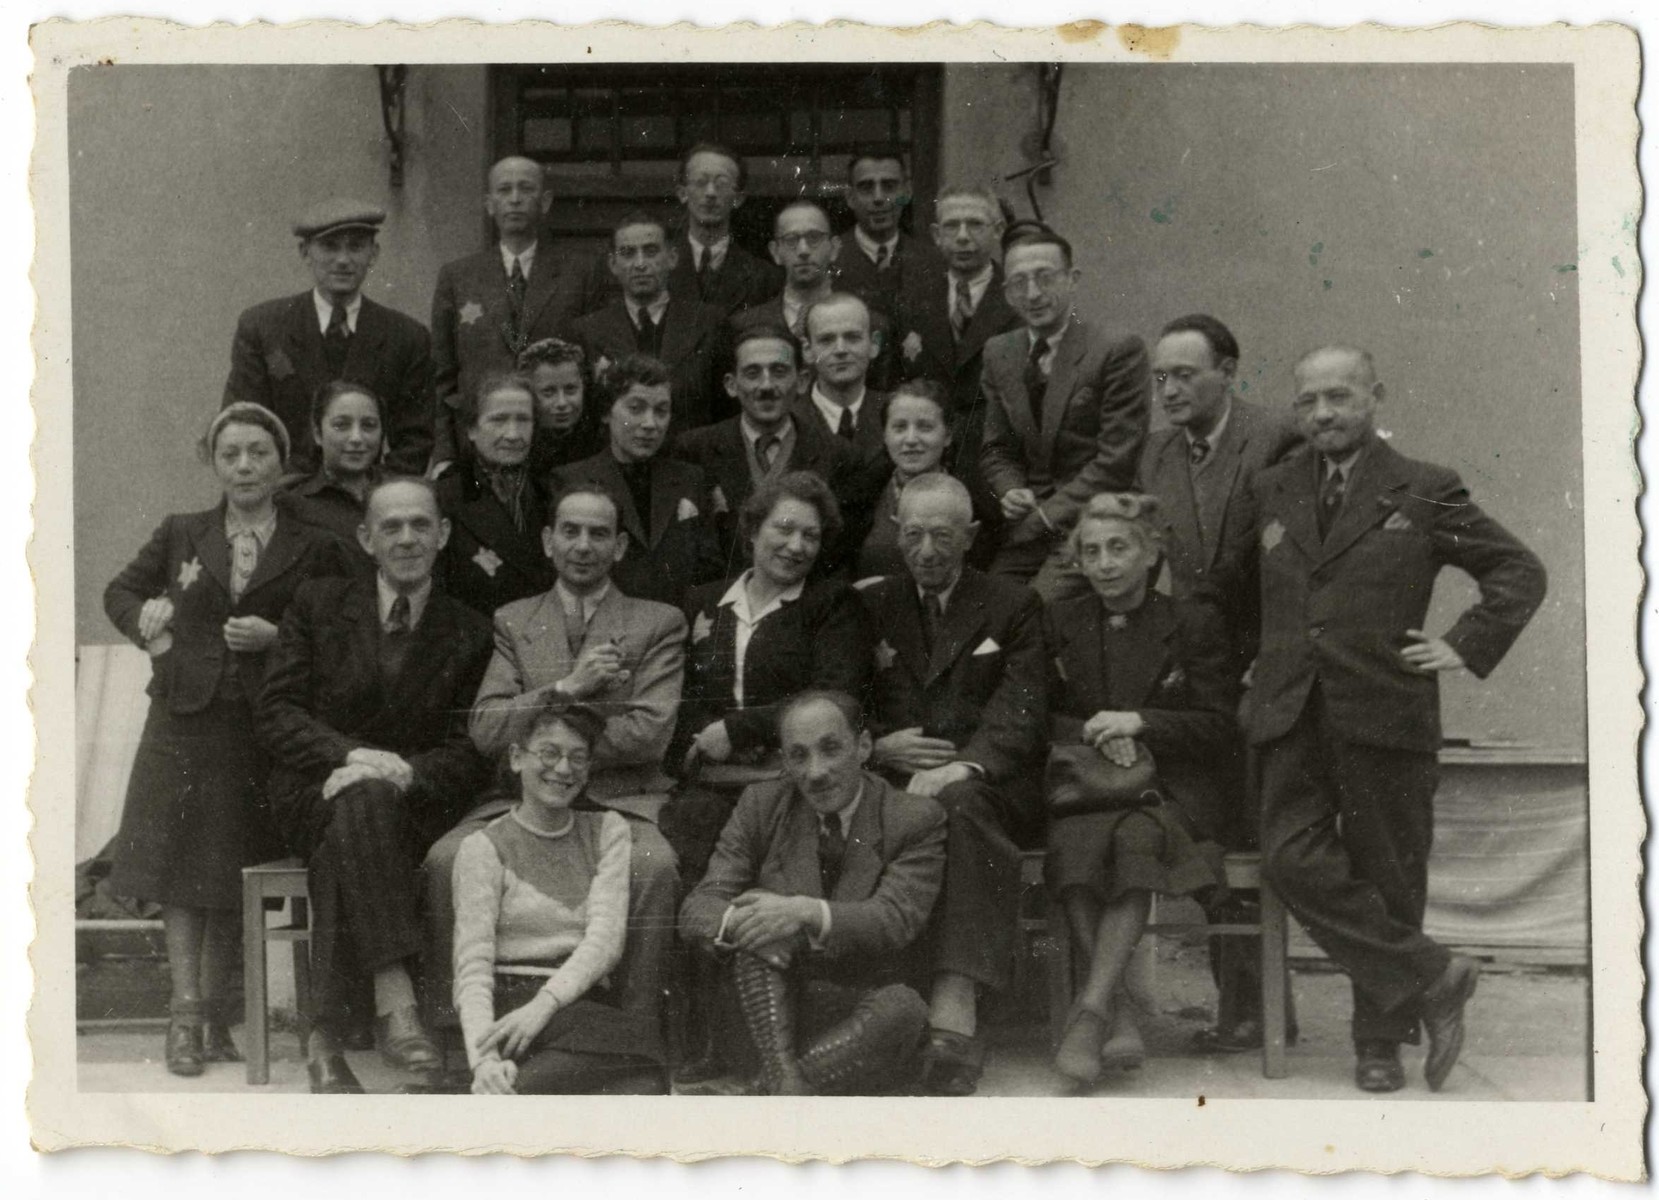 Group portrait of the employees of the "sorting" workshop in the Lodz ghetto, directed by Aron Pruszynowski.

Pictured in the third row, fourth from the left is Dora Gerson.